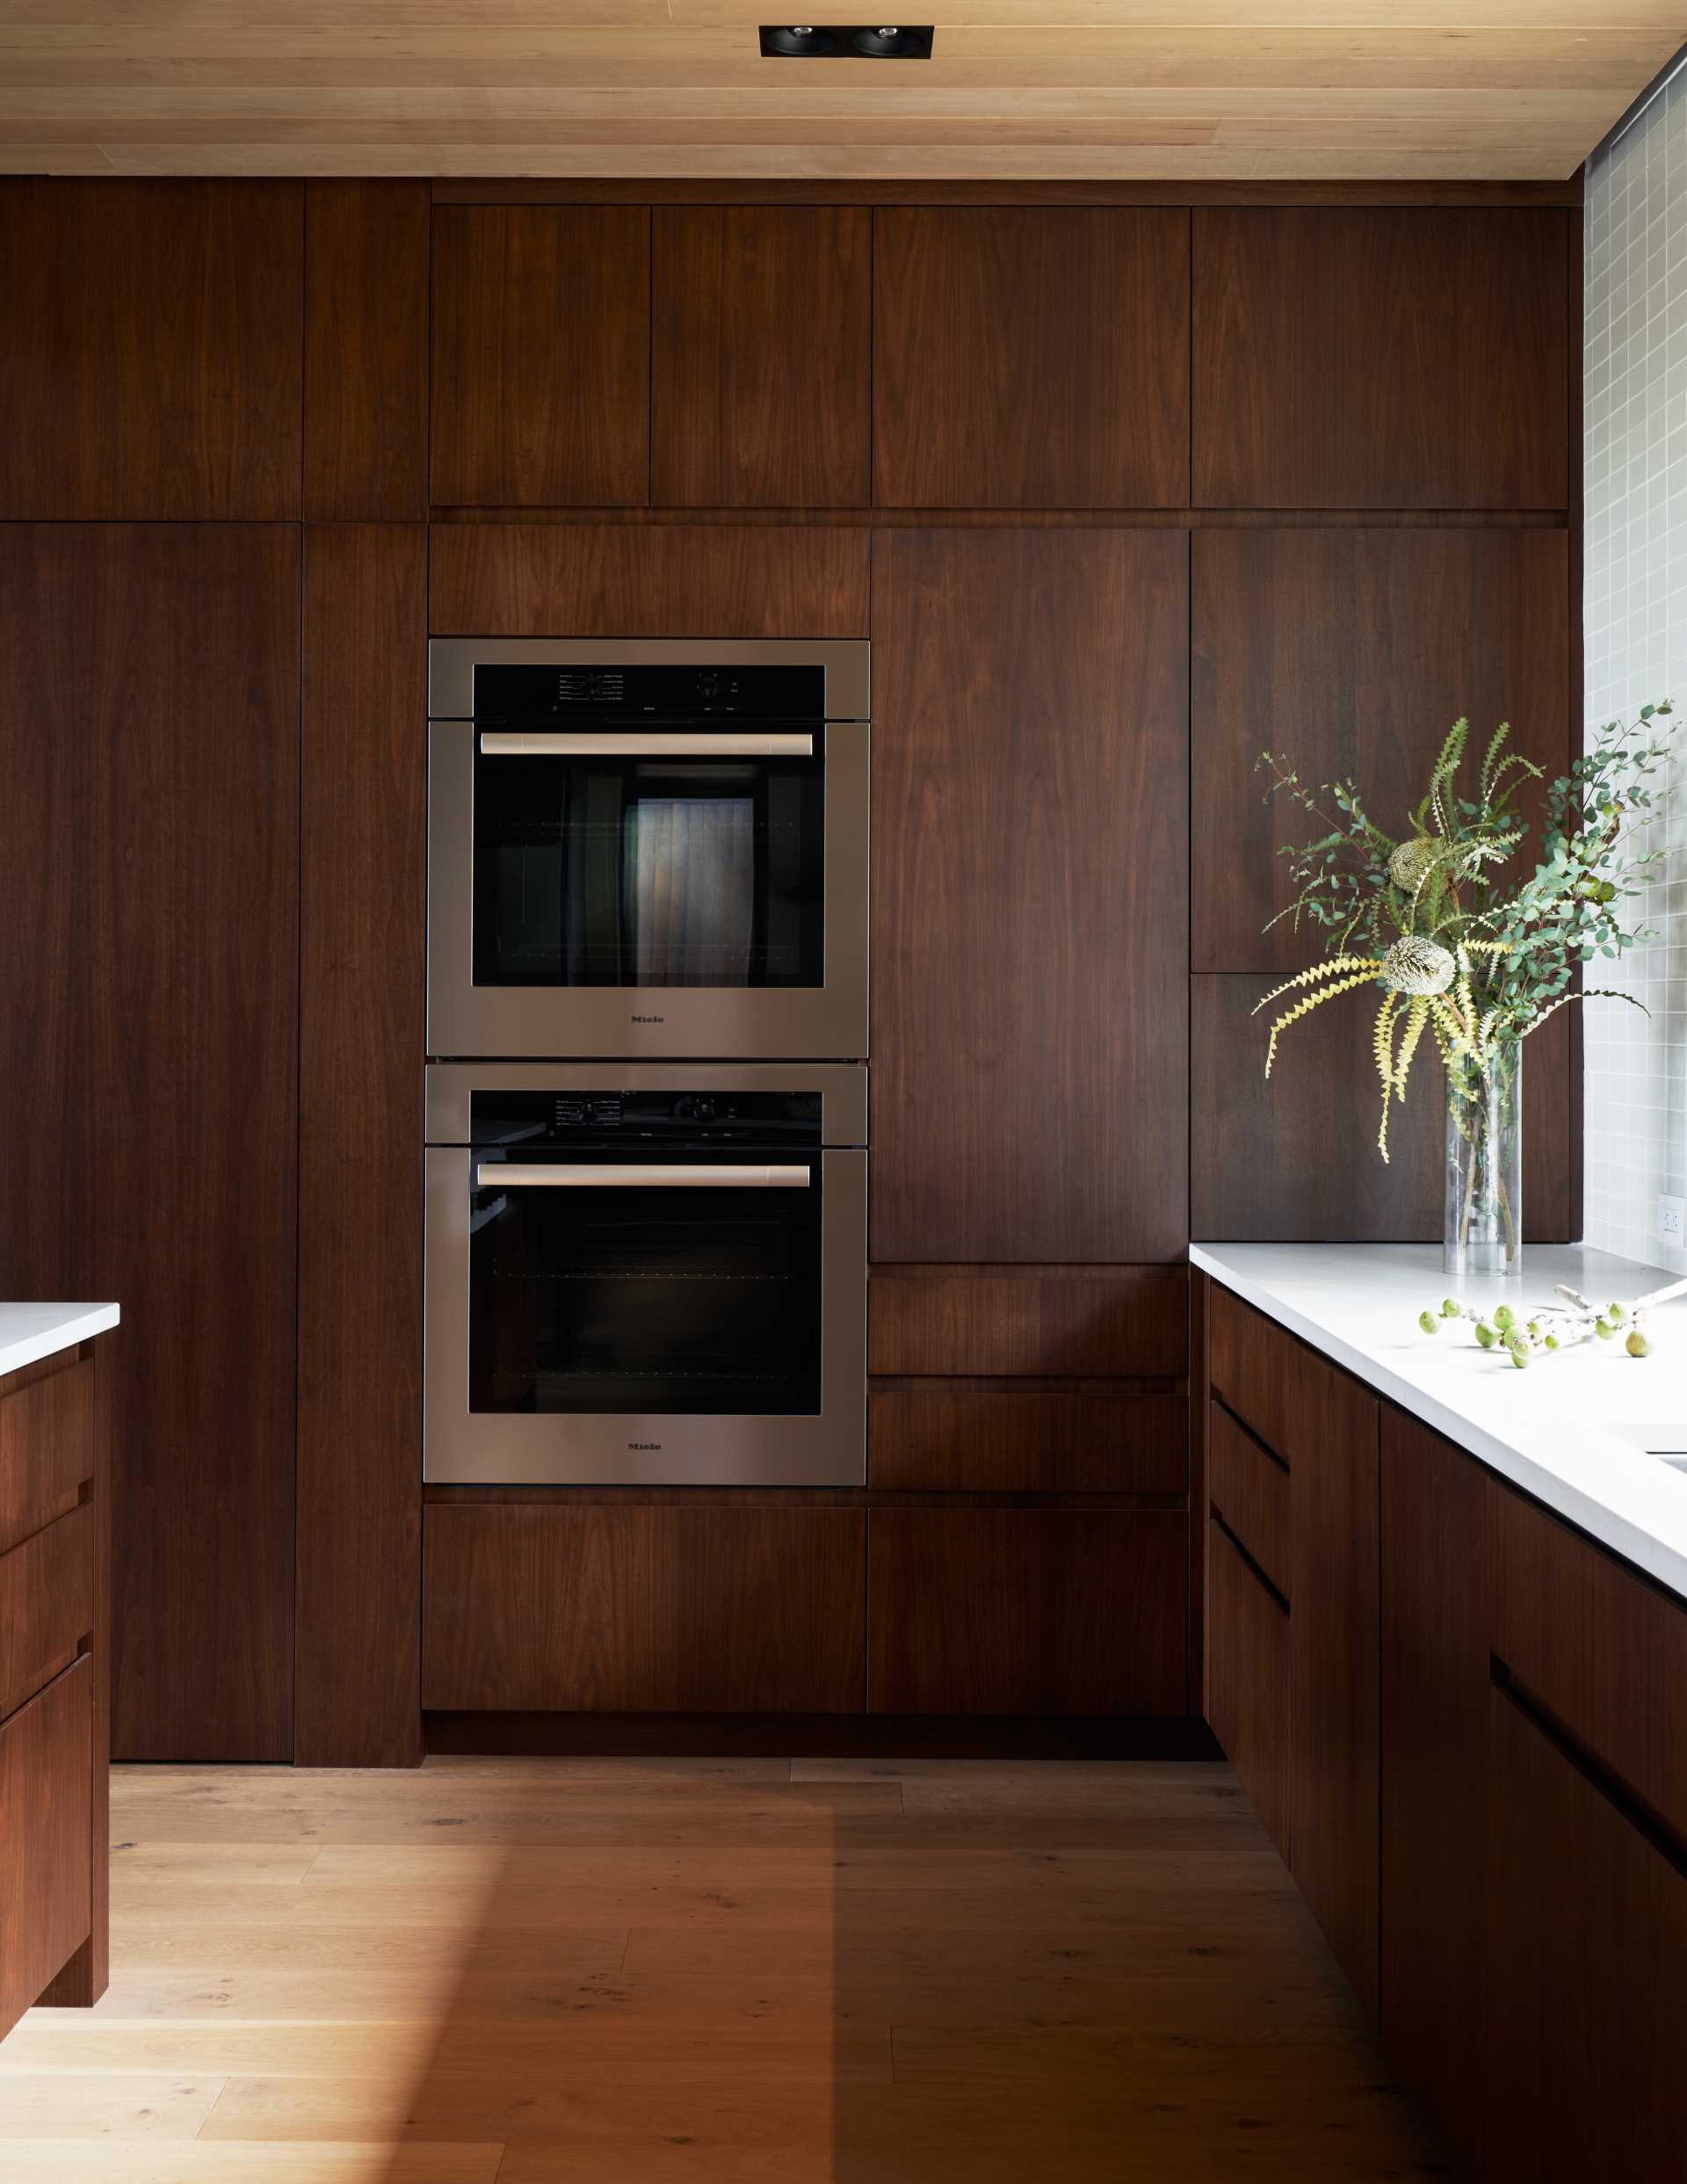 A modern kitchen with dark walnut cabinets and white countertops.